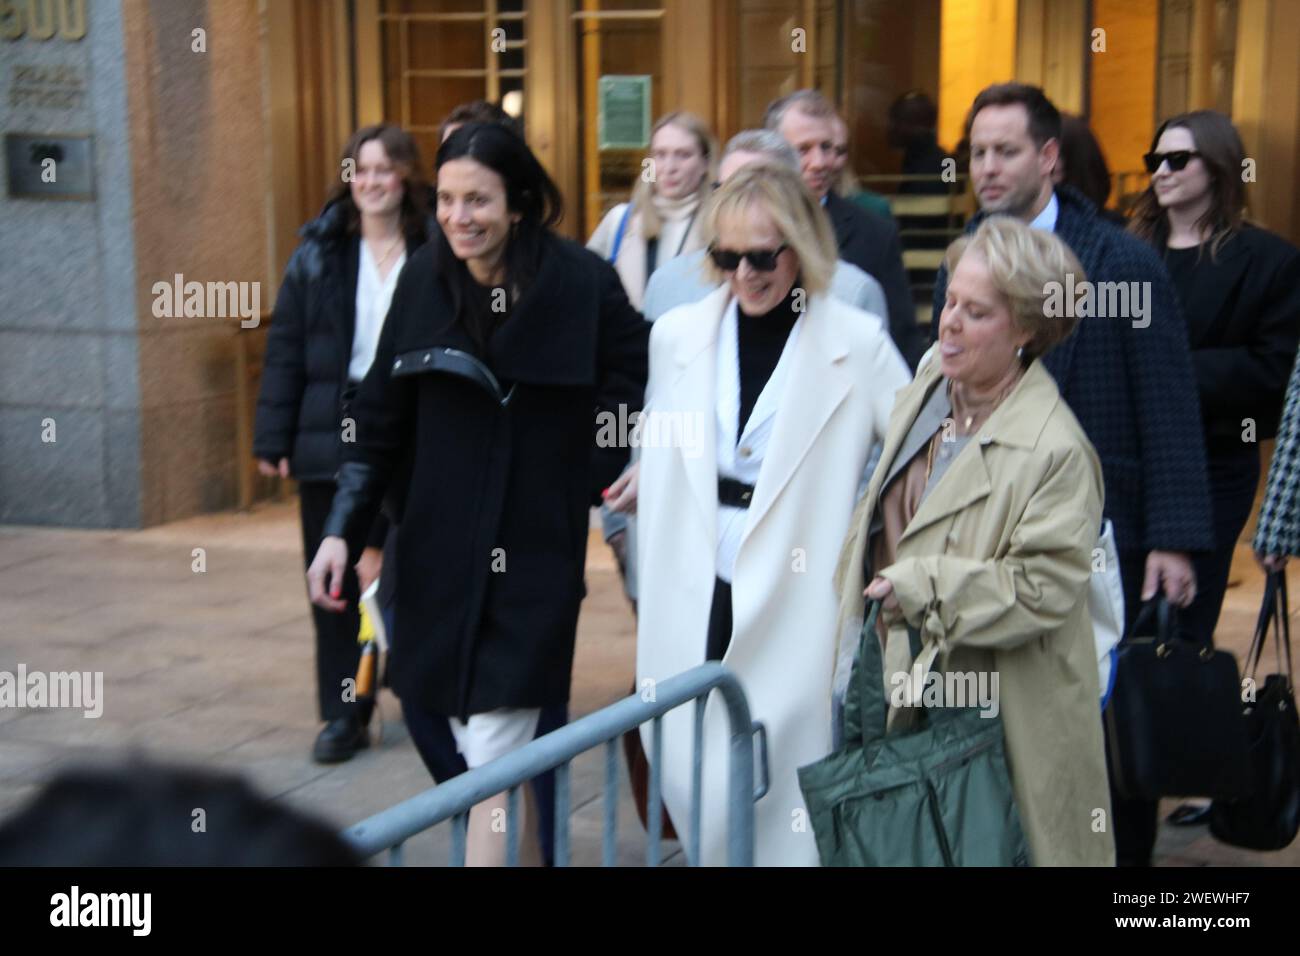 500 Pearl St, New York, NY 10007, USA. Jan 26, 2024. Plaintiff E Jean Carroll and legal team depart the courthouse in New York, where a jury had just awarded her over $83 Million in compensatory and punitive damages against President Donald Trump, who earlier in the day referred to the defamation lawsuit against him as “a hoax and a witch-hunt”.  Credit: ©Julia Mineeva/EGBN TV News/Alamy Live News Stock Photo